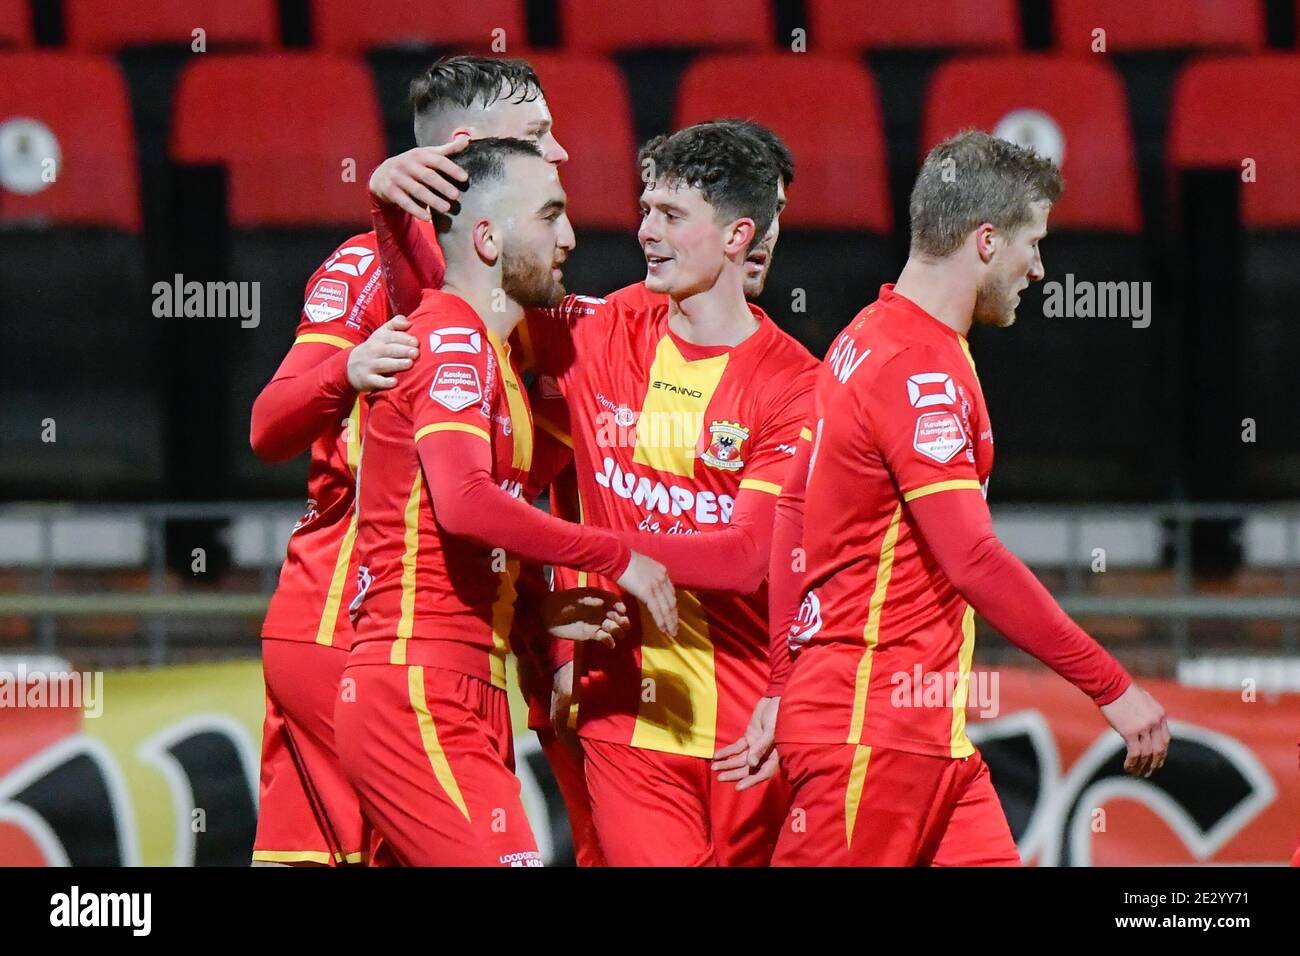 Deventer Netherlands January 15 L Erkan Eyibil Of Go Ahead Eagles During The Dutch Keukenkampioendivision Match Between Go Ahead Eagles And Mvv At Stock Photo Alamy